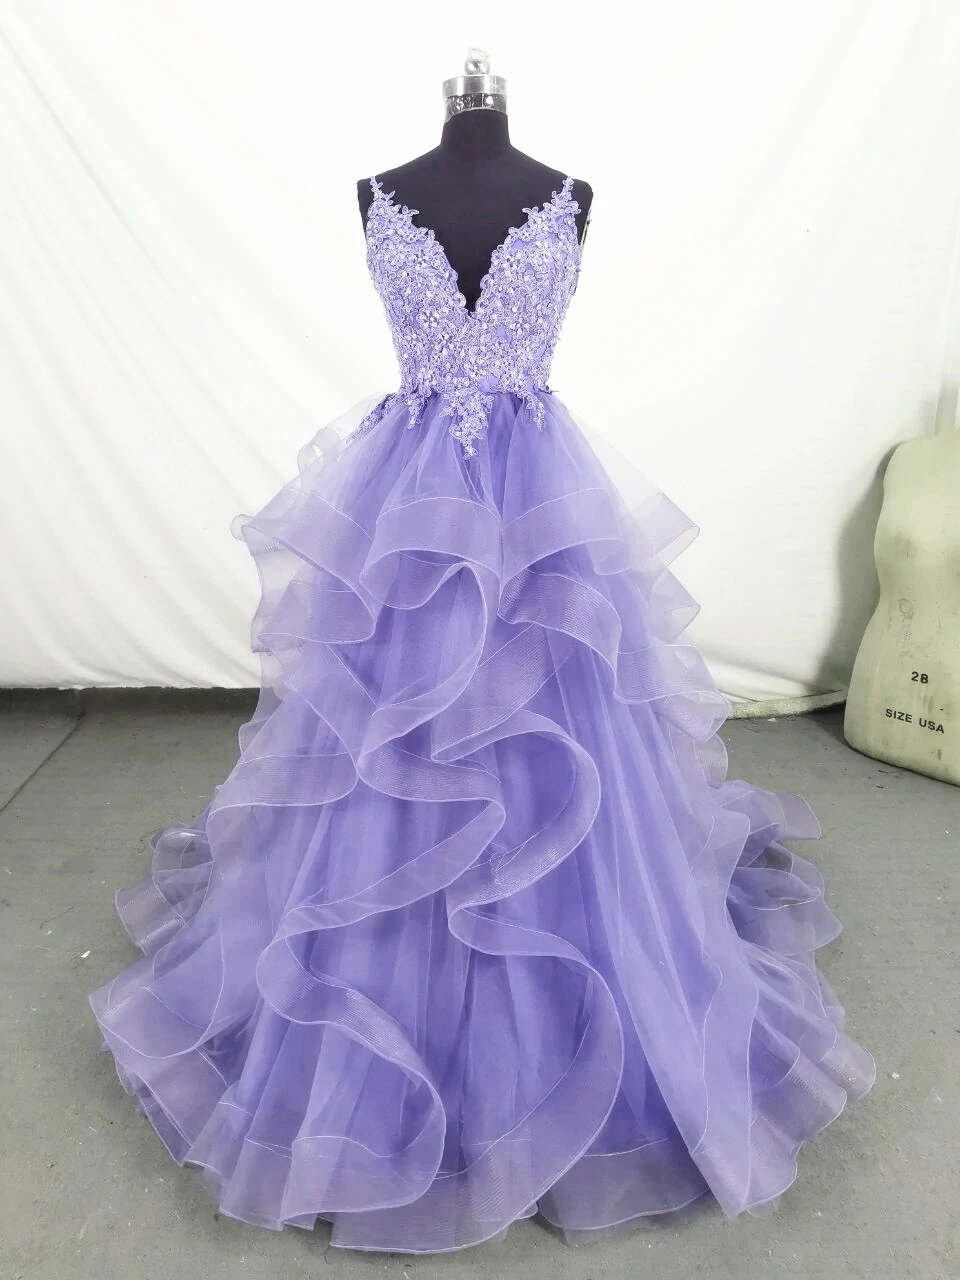 Lavender Long Prom Dress With Horsehair Trimmed Skirt Evening Gowns Women